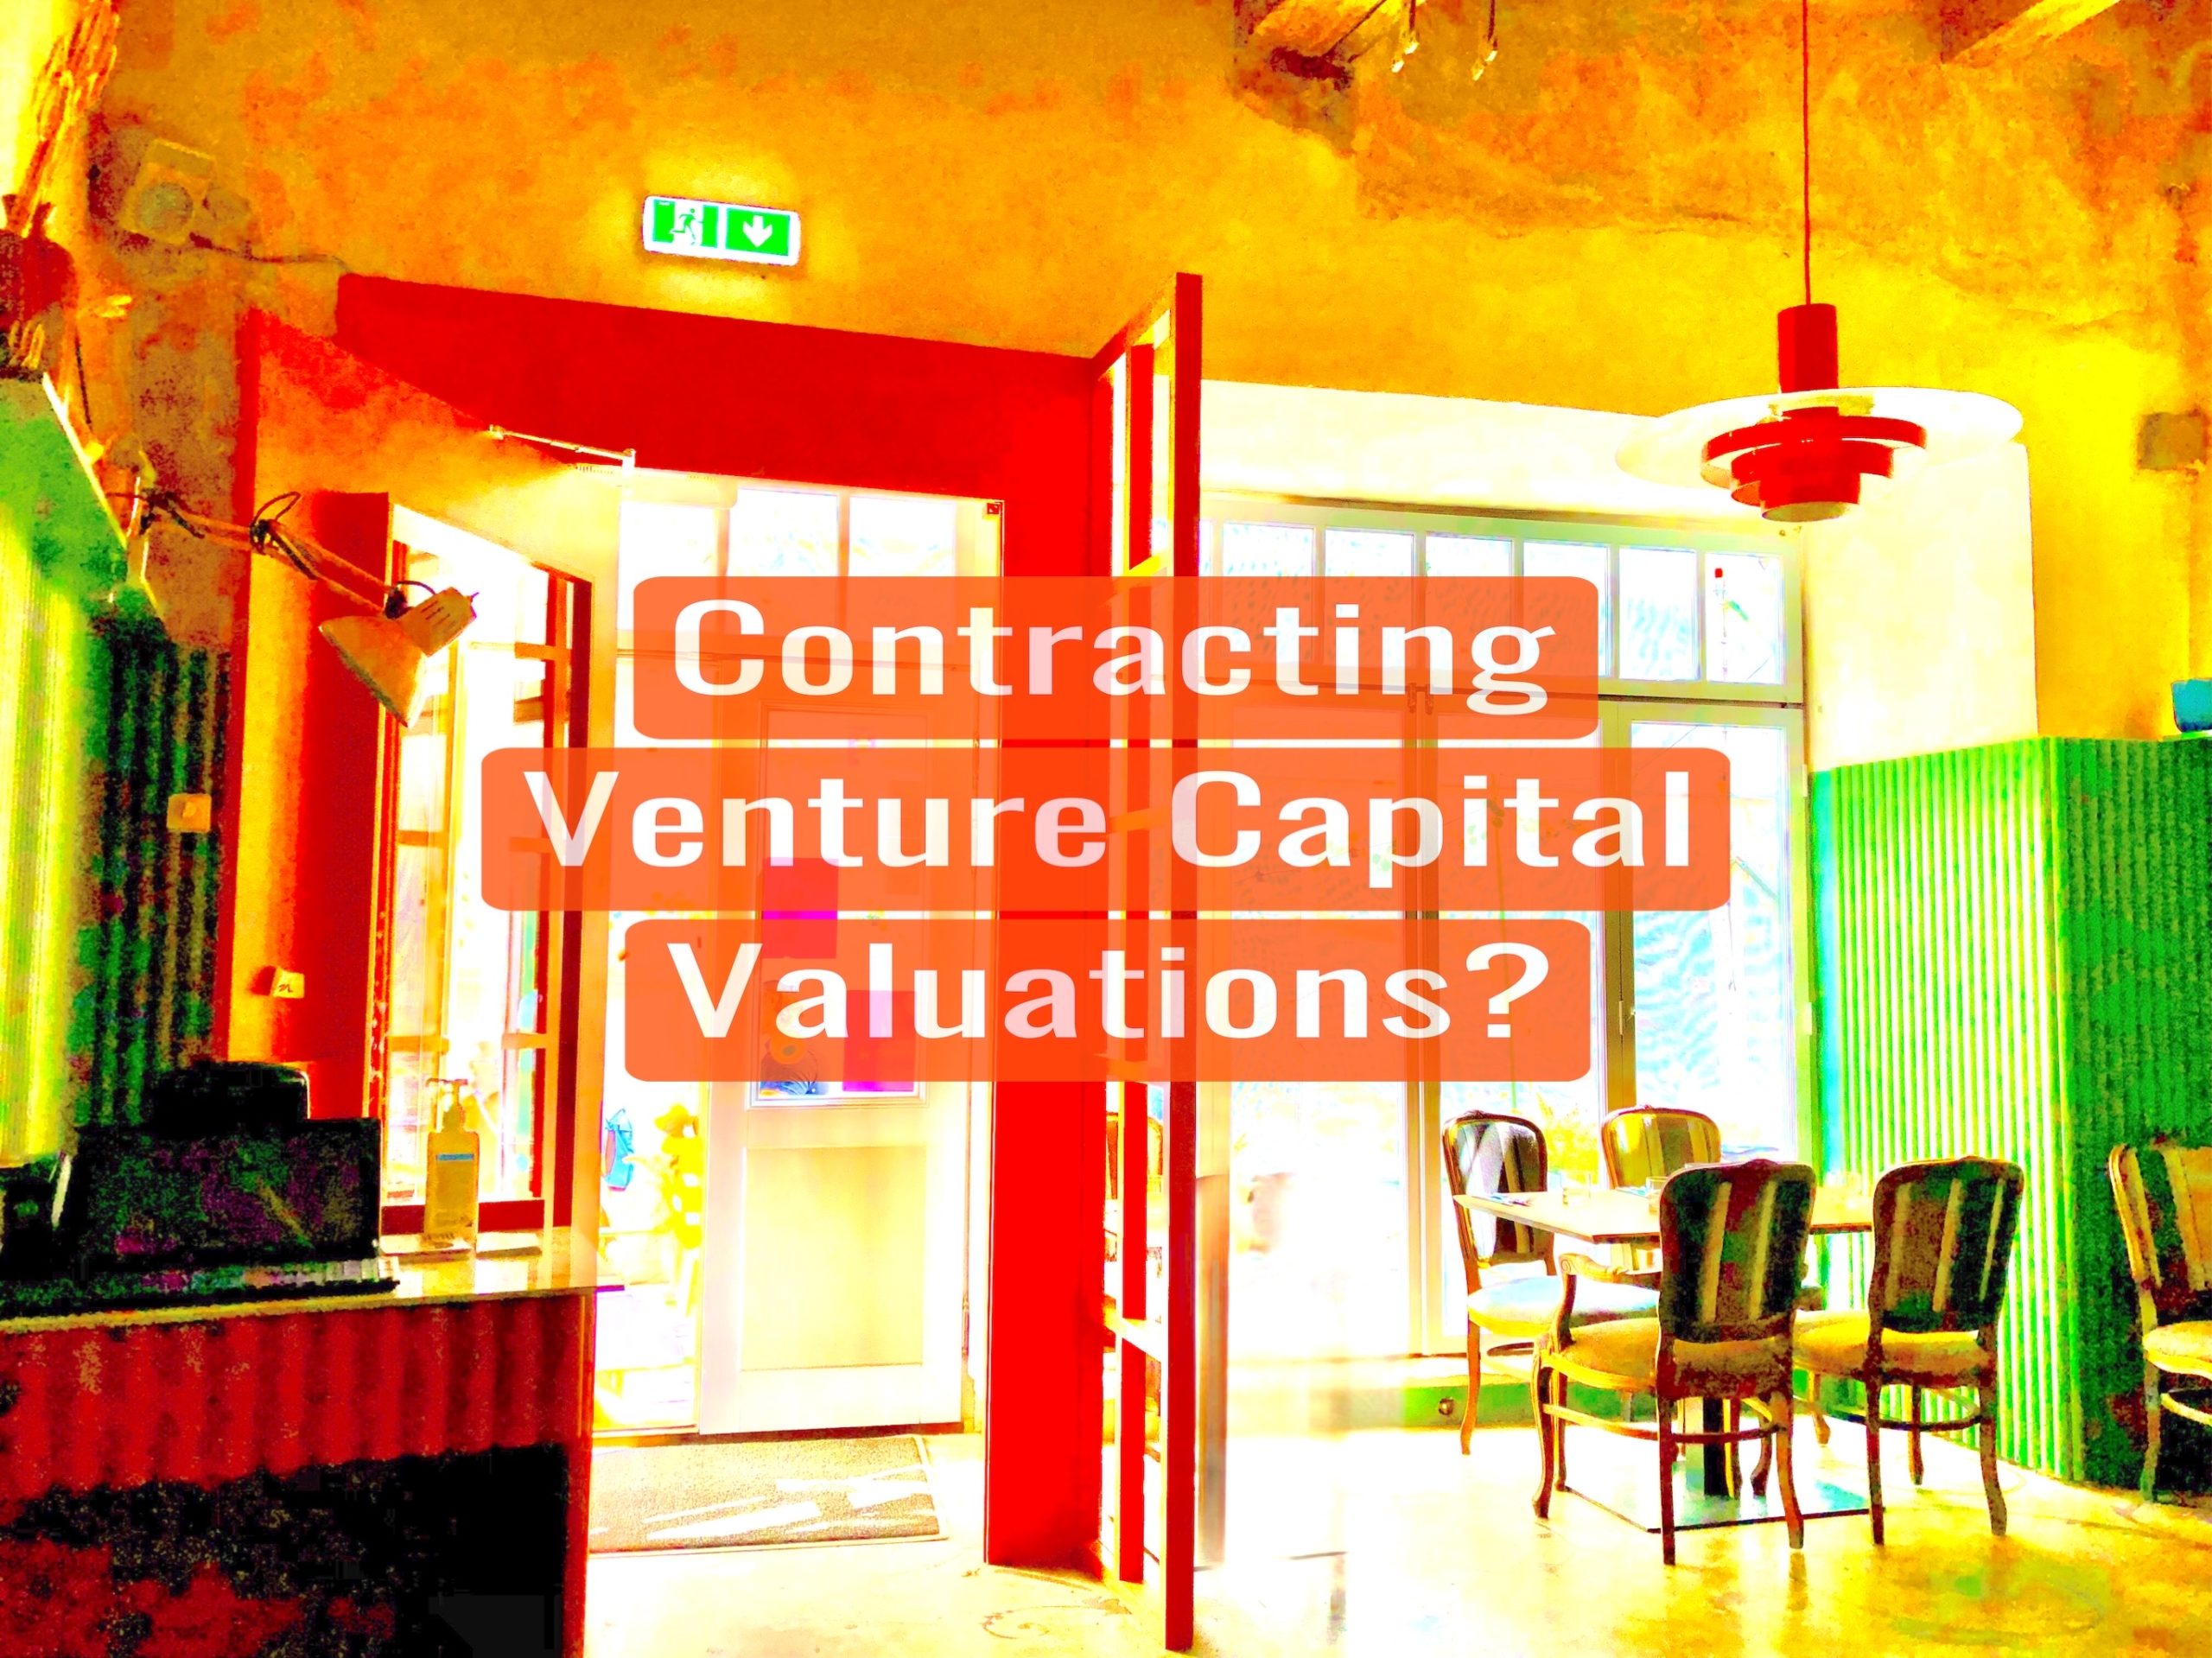 REUTERS: Why are early stage venture capital valuations contracting?